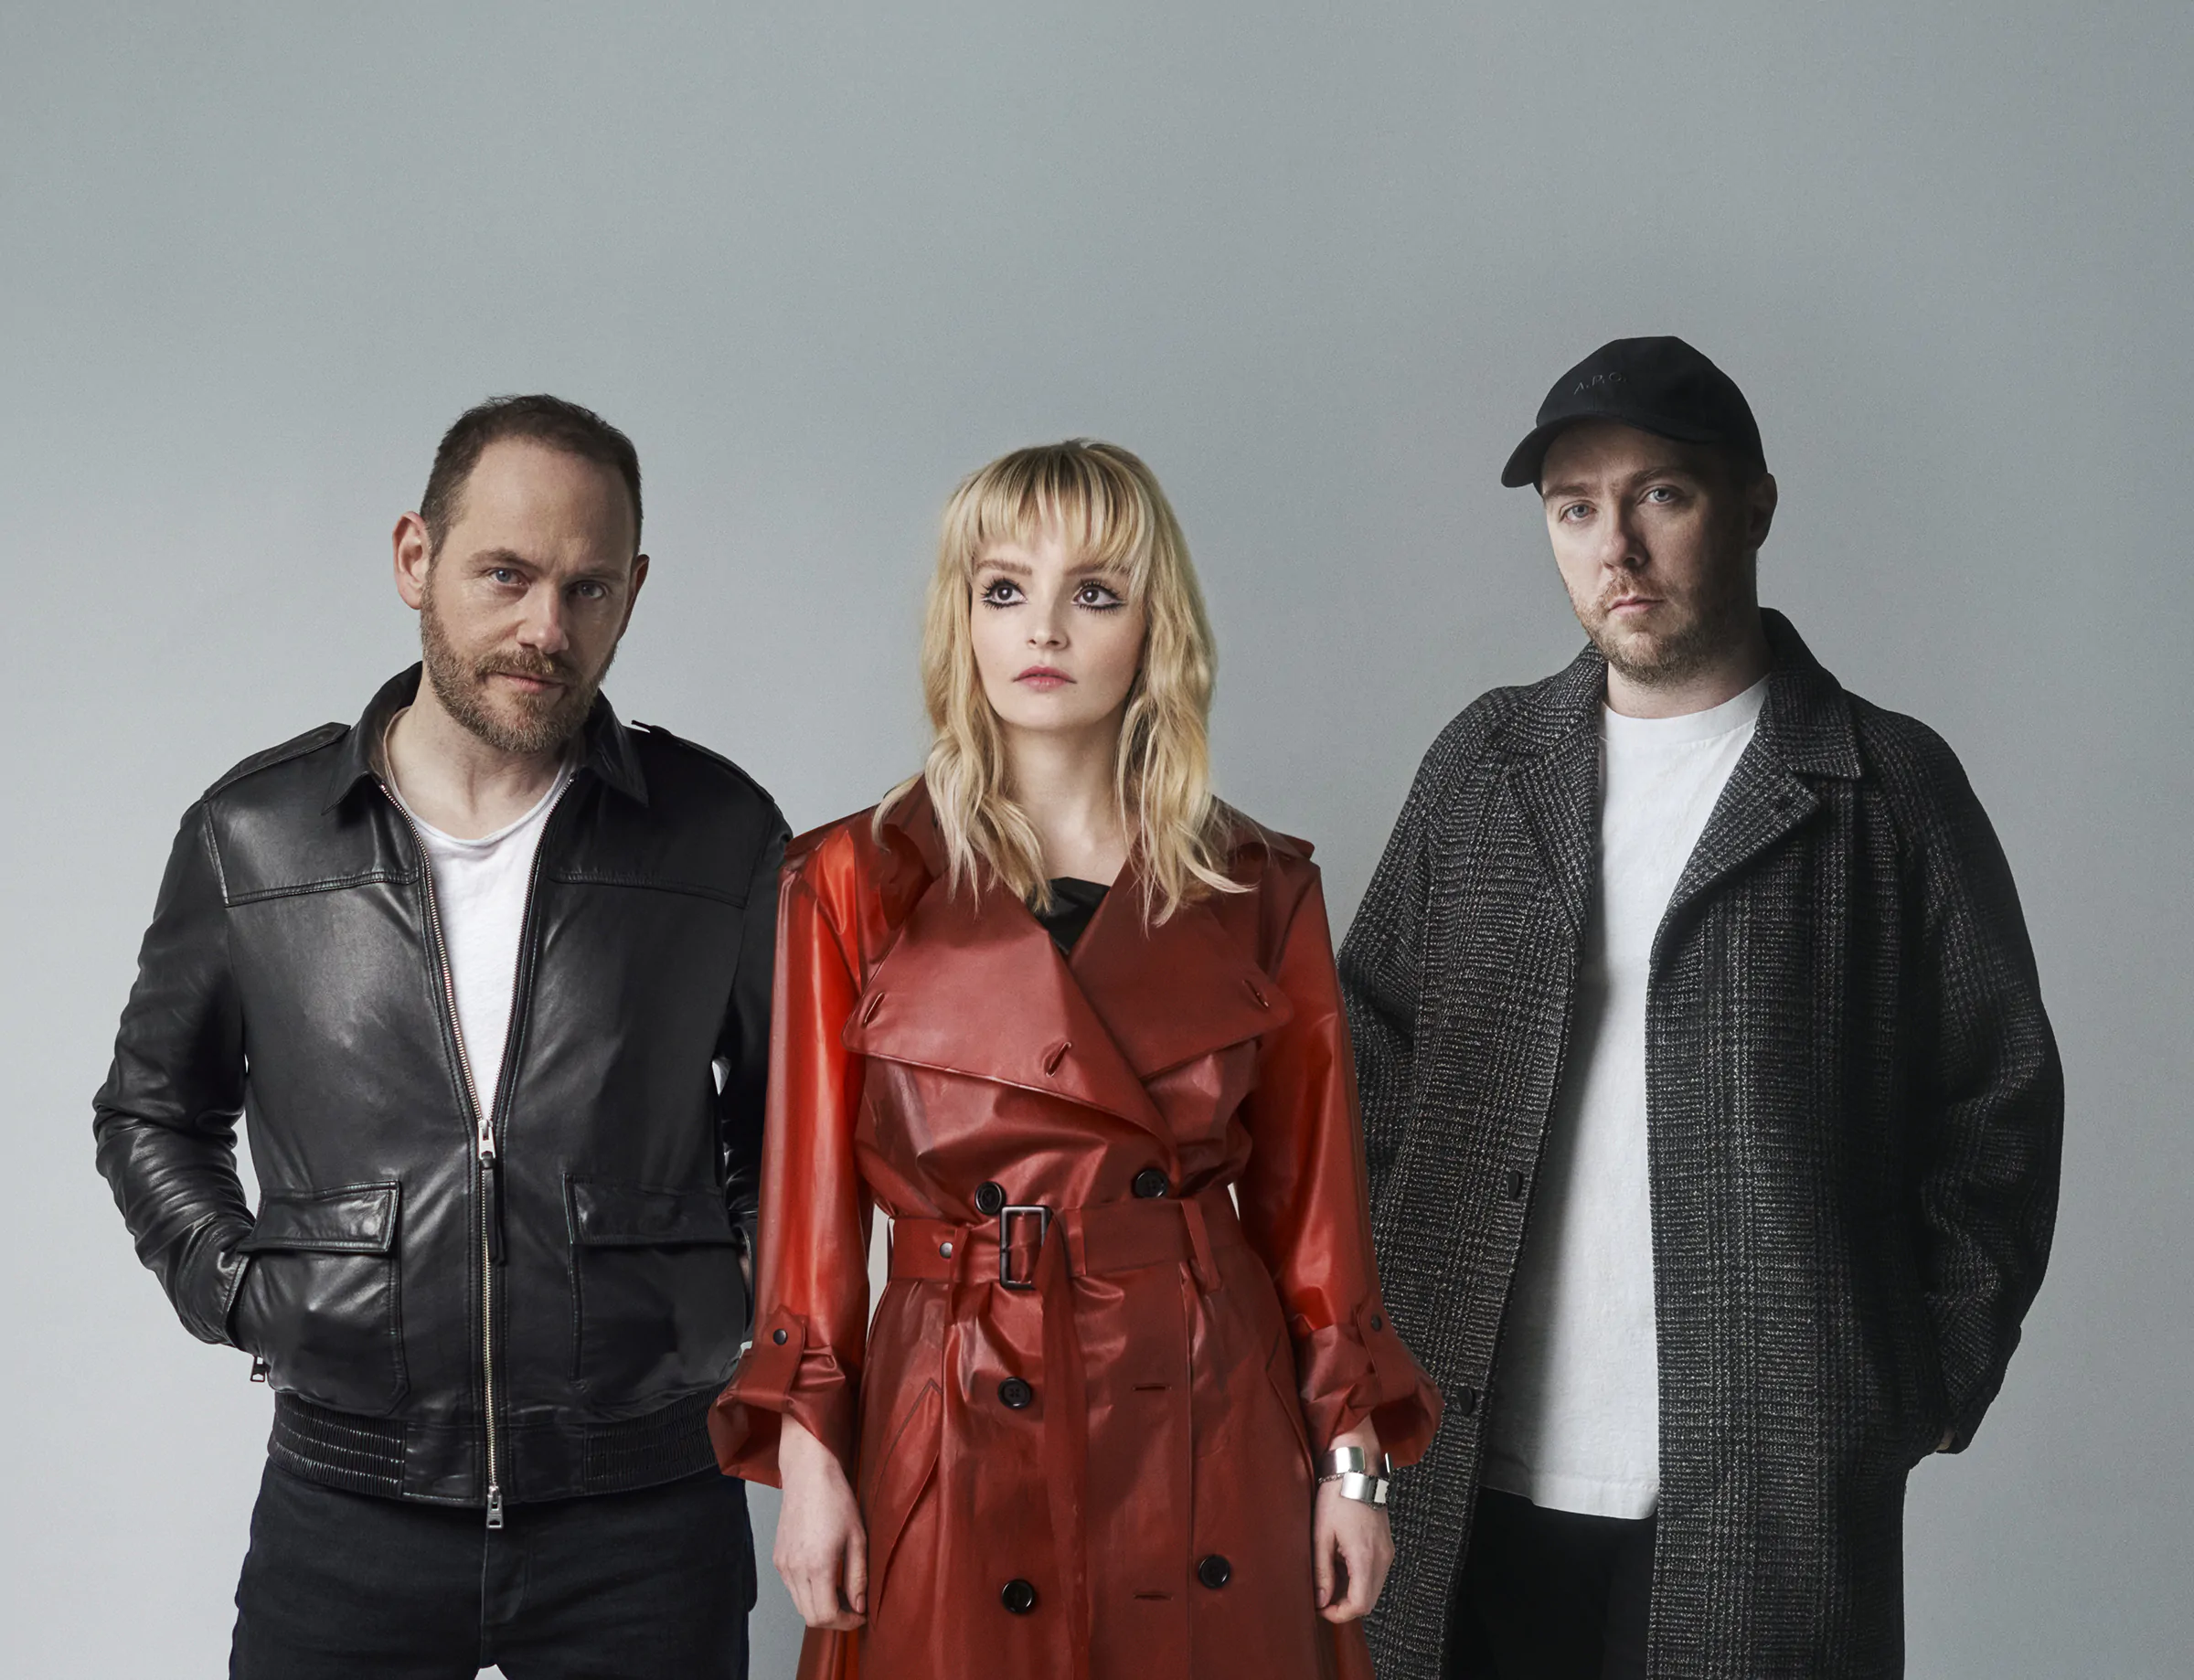 CHVRCHES release their long-awaited new single ‘He Said She Said’ – Listen Now!